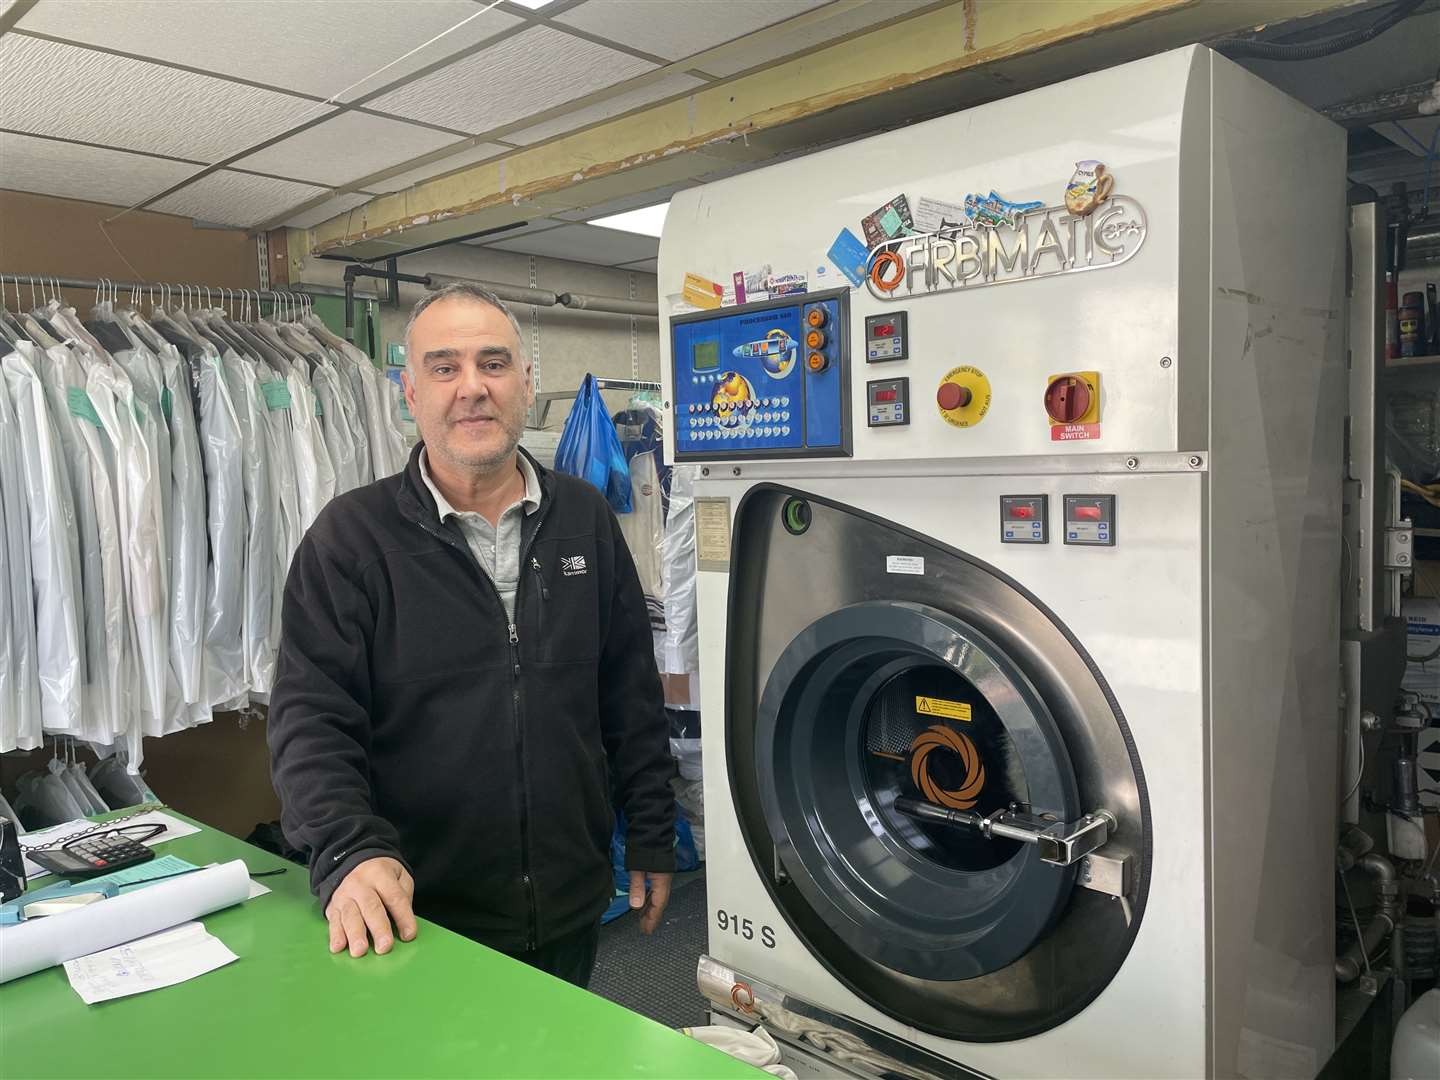 Eddie Williams, who has Evergreen Dry Cleaners in Hythe Street for 32 years, fears this may be his last year running the business